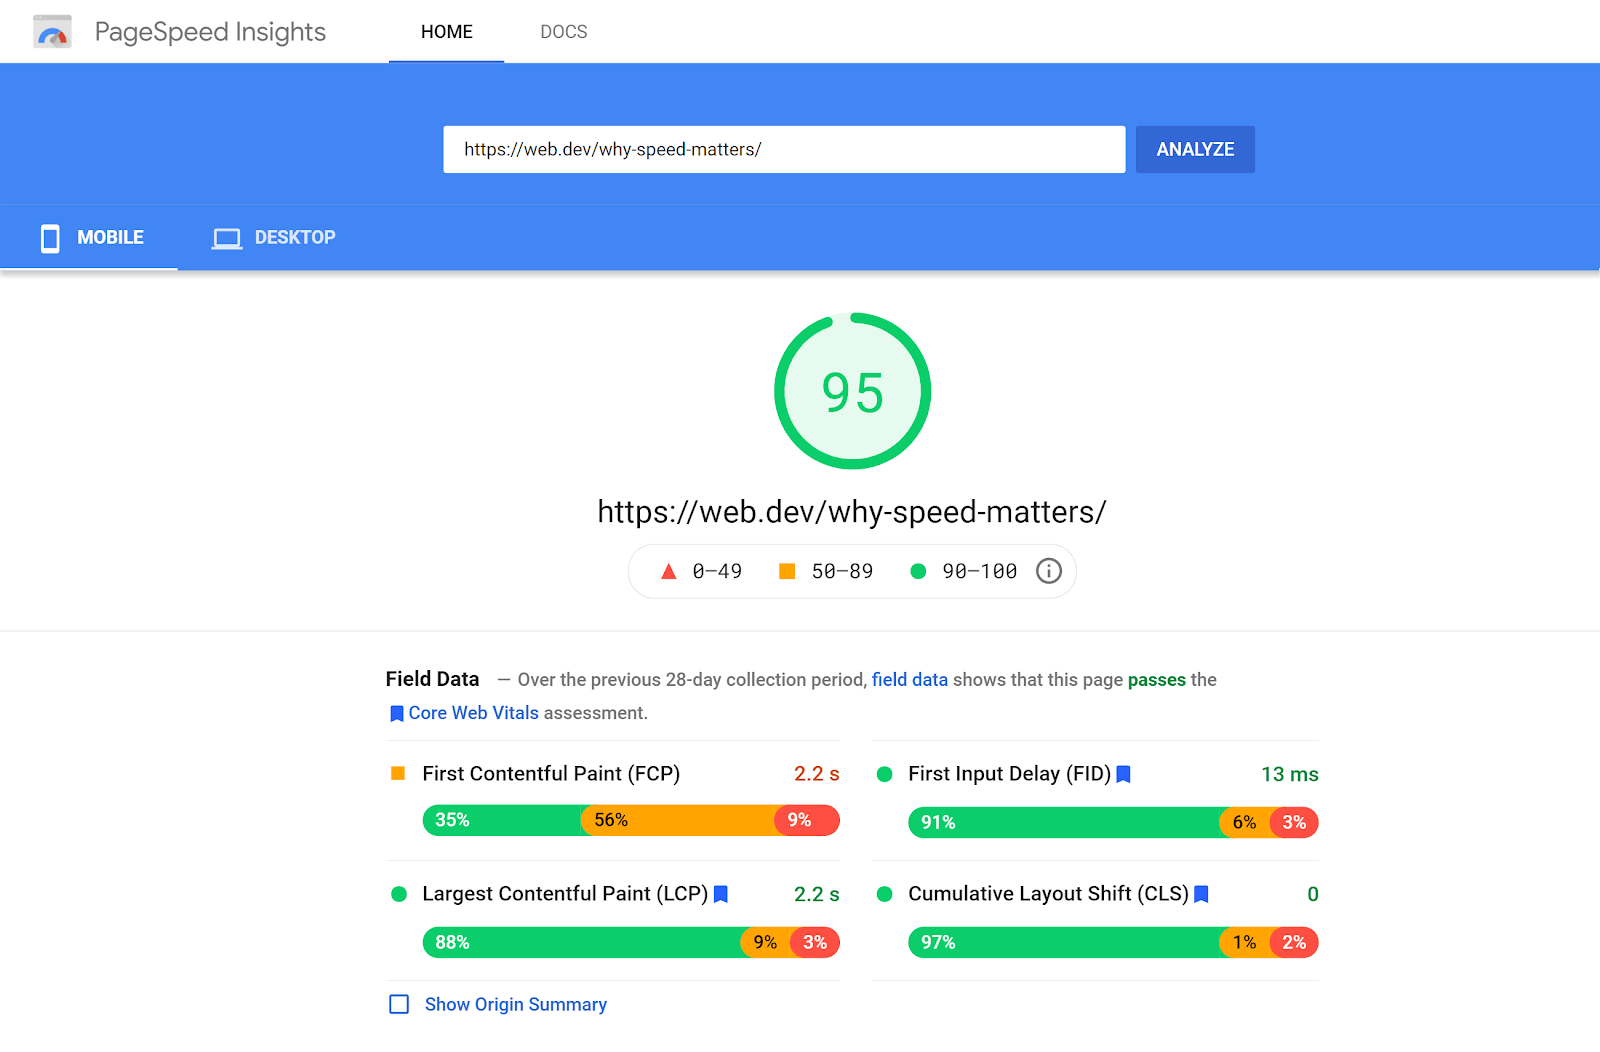 Field data from Google PageSpeed Insights